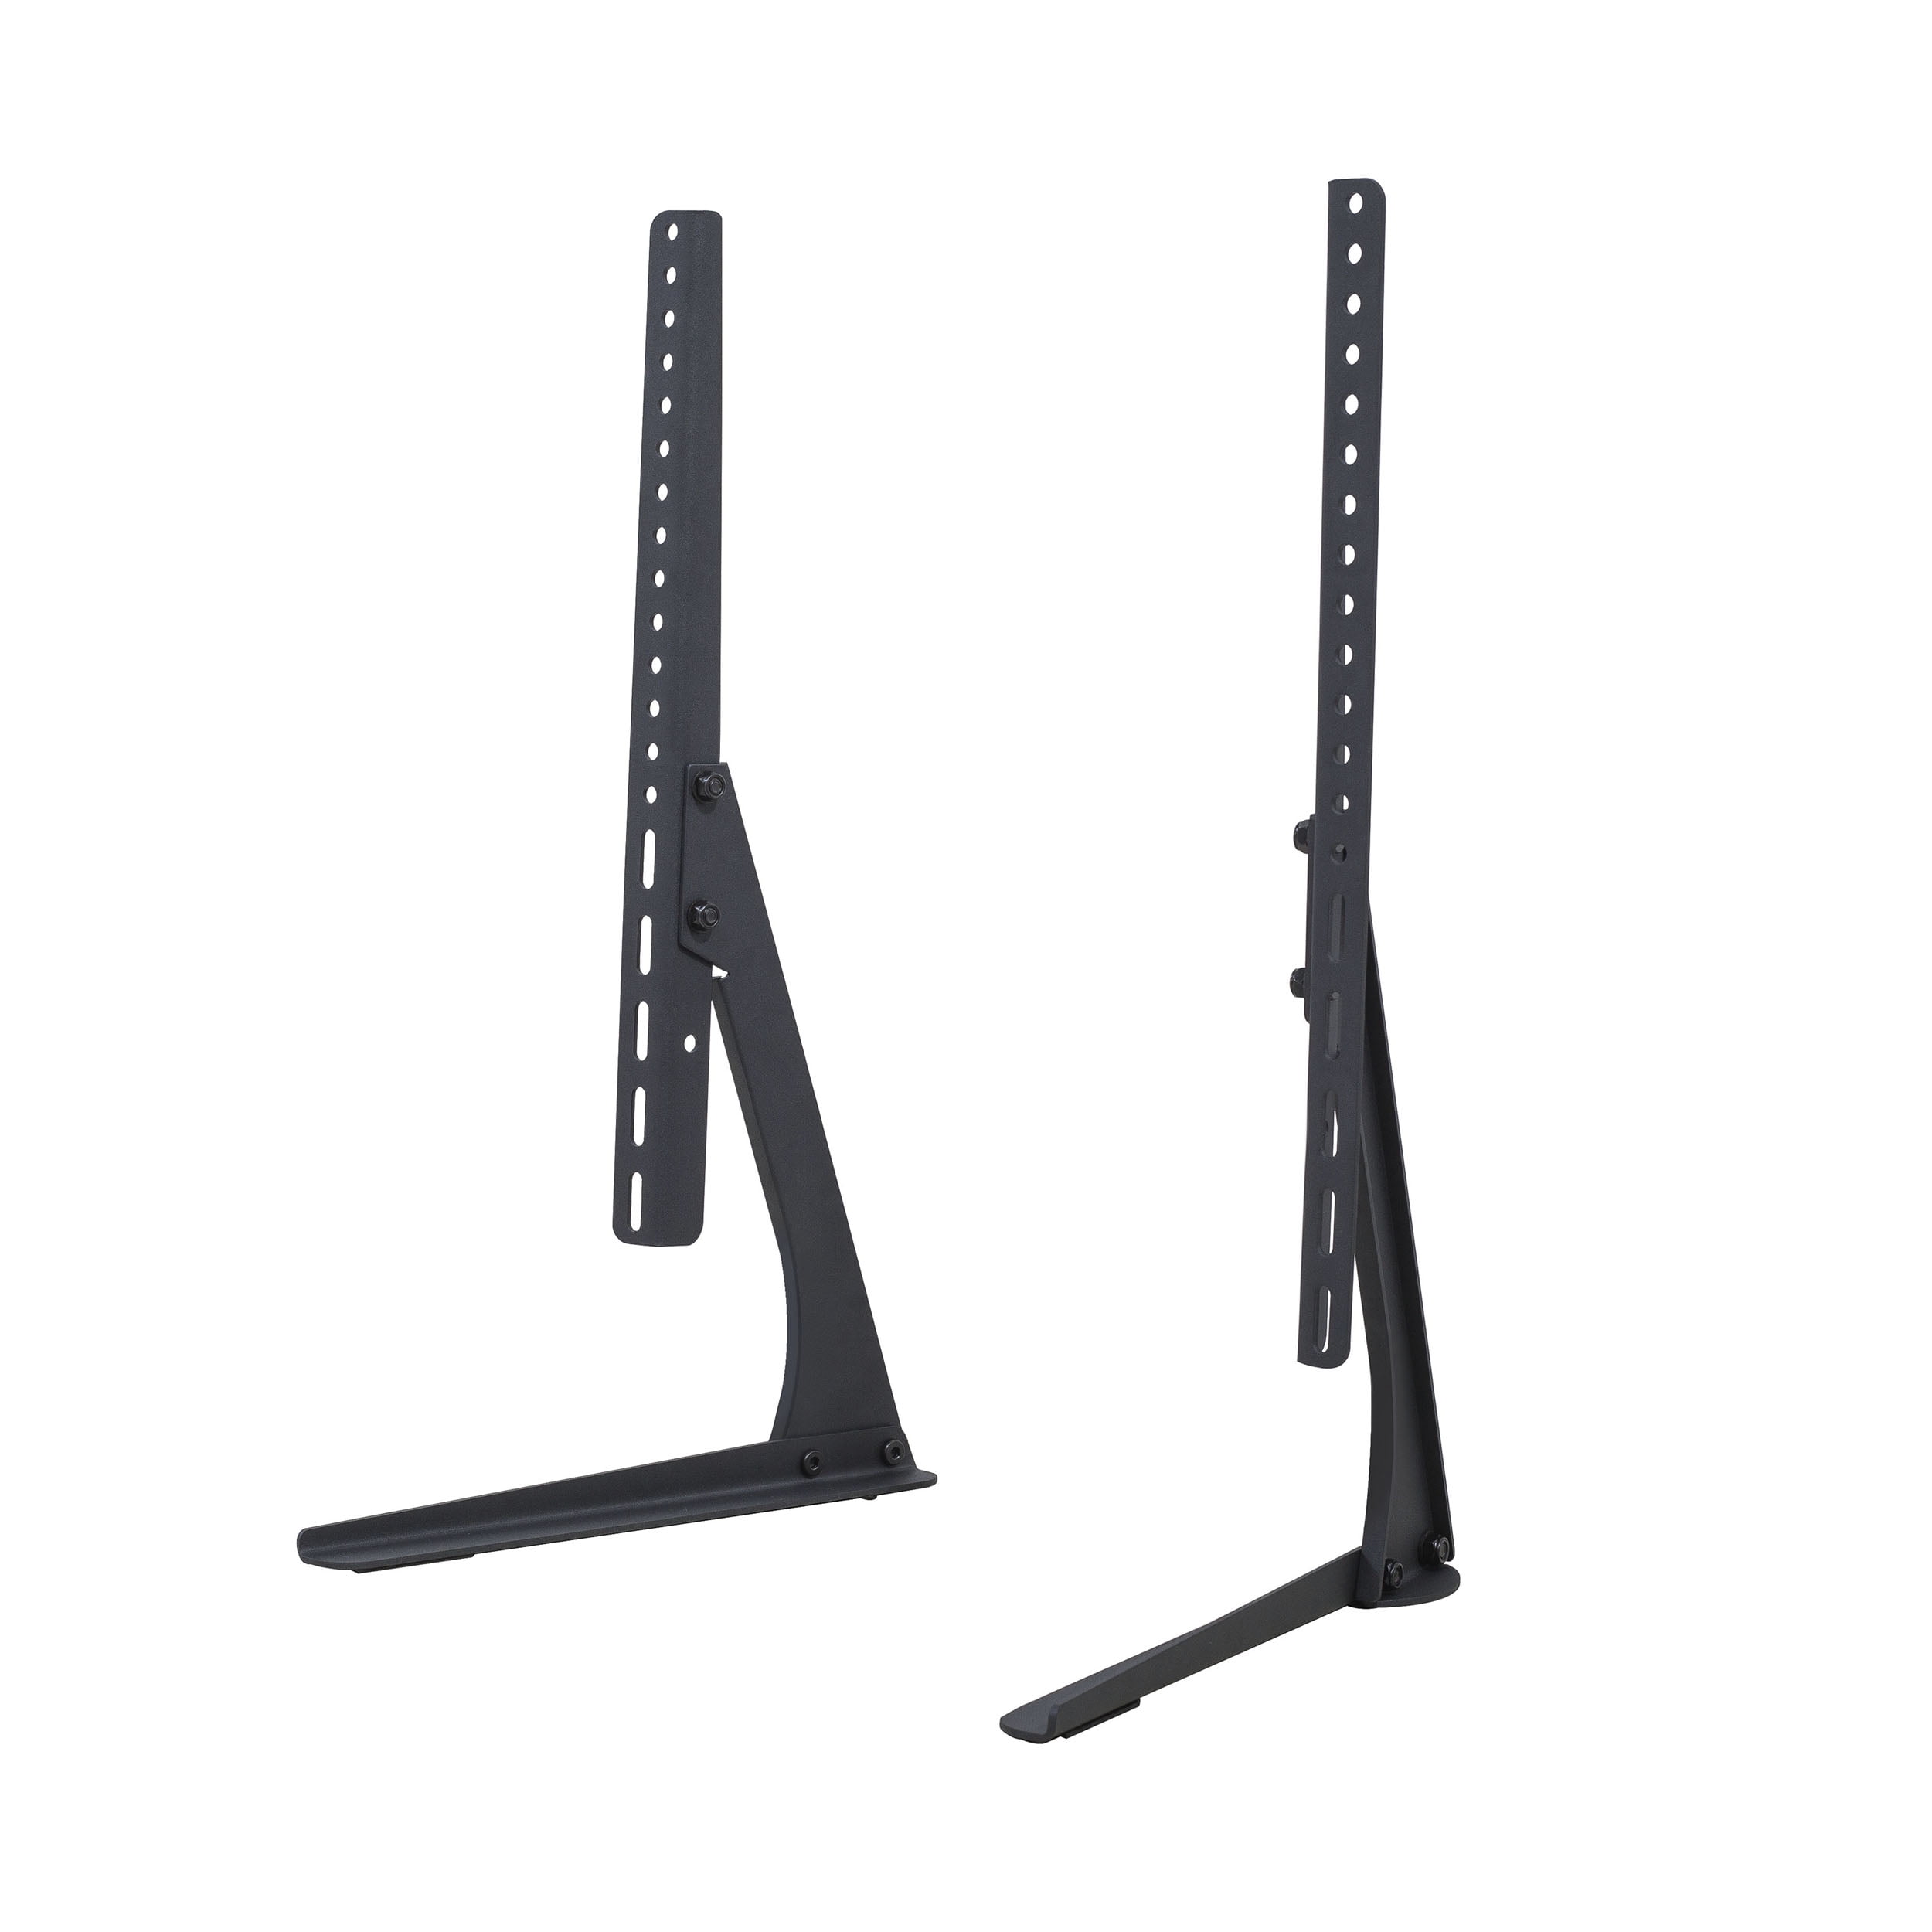 onn. Tabletop TV Stand for 37" to Supports to 88 lbs - Walmart.com